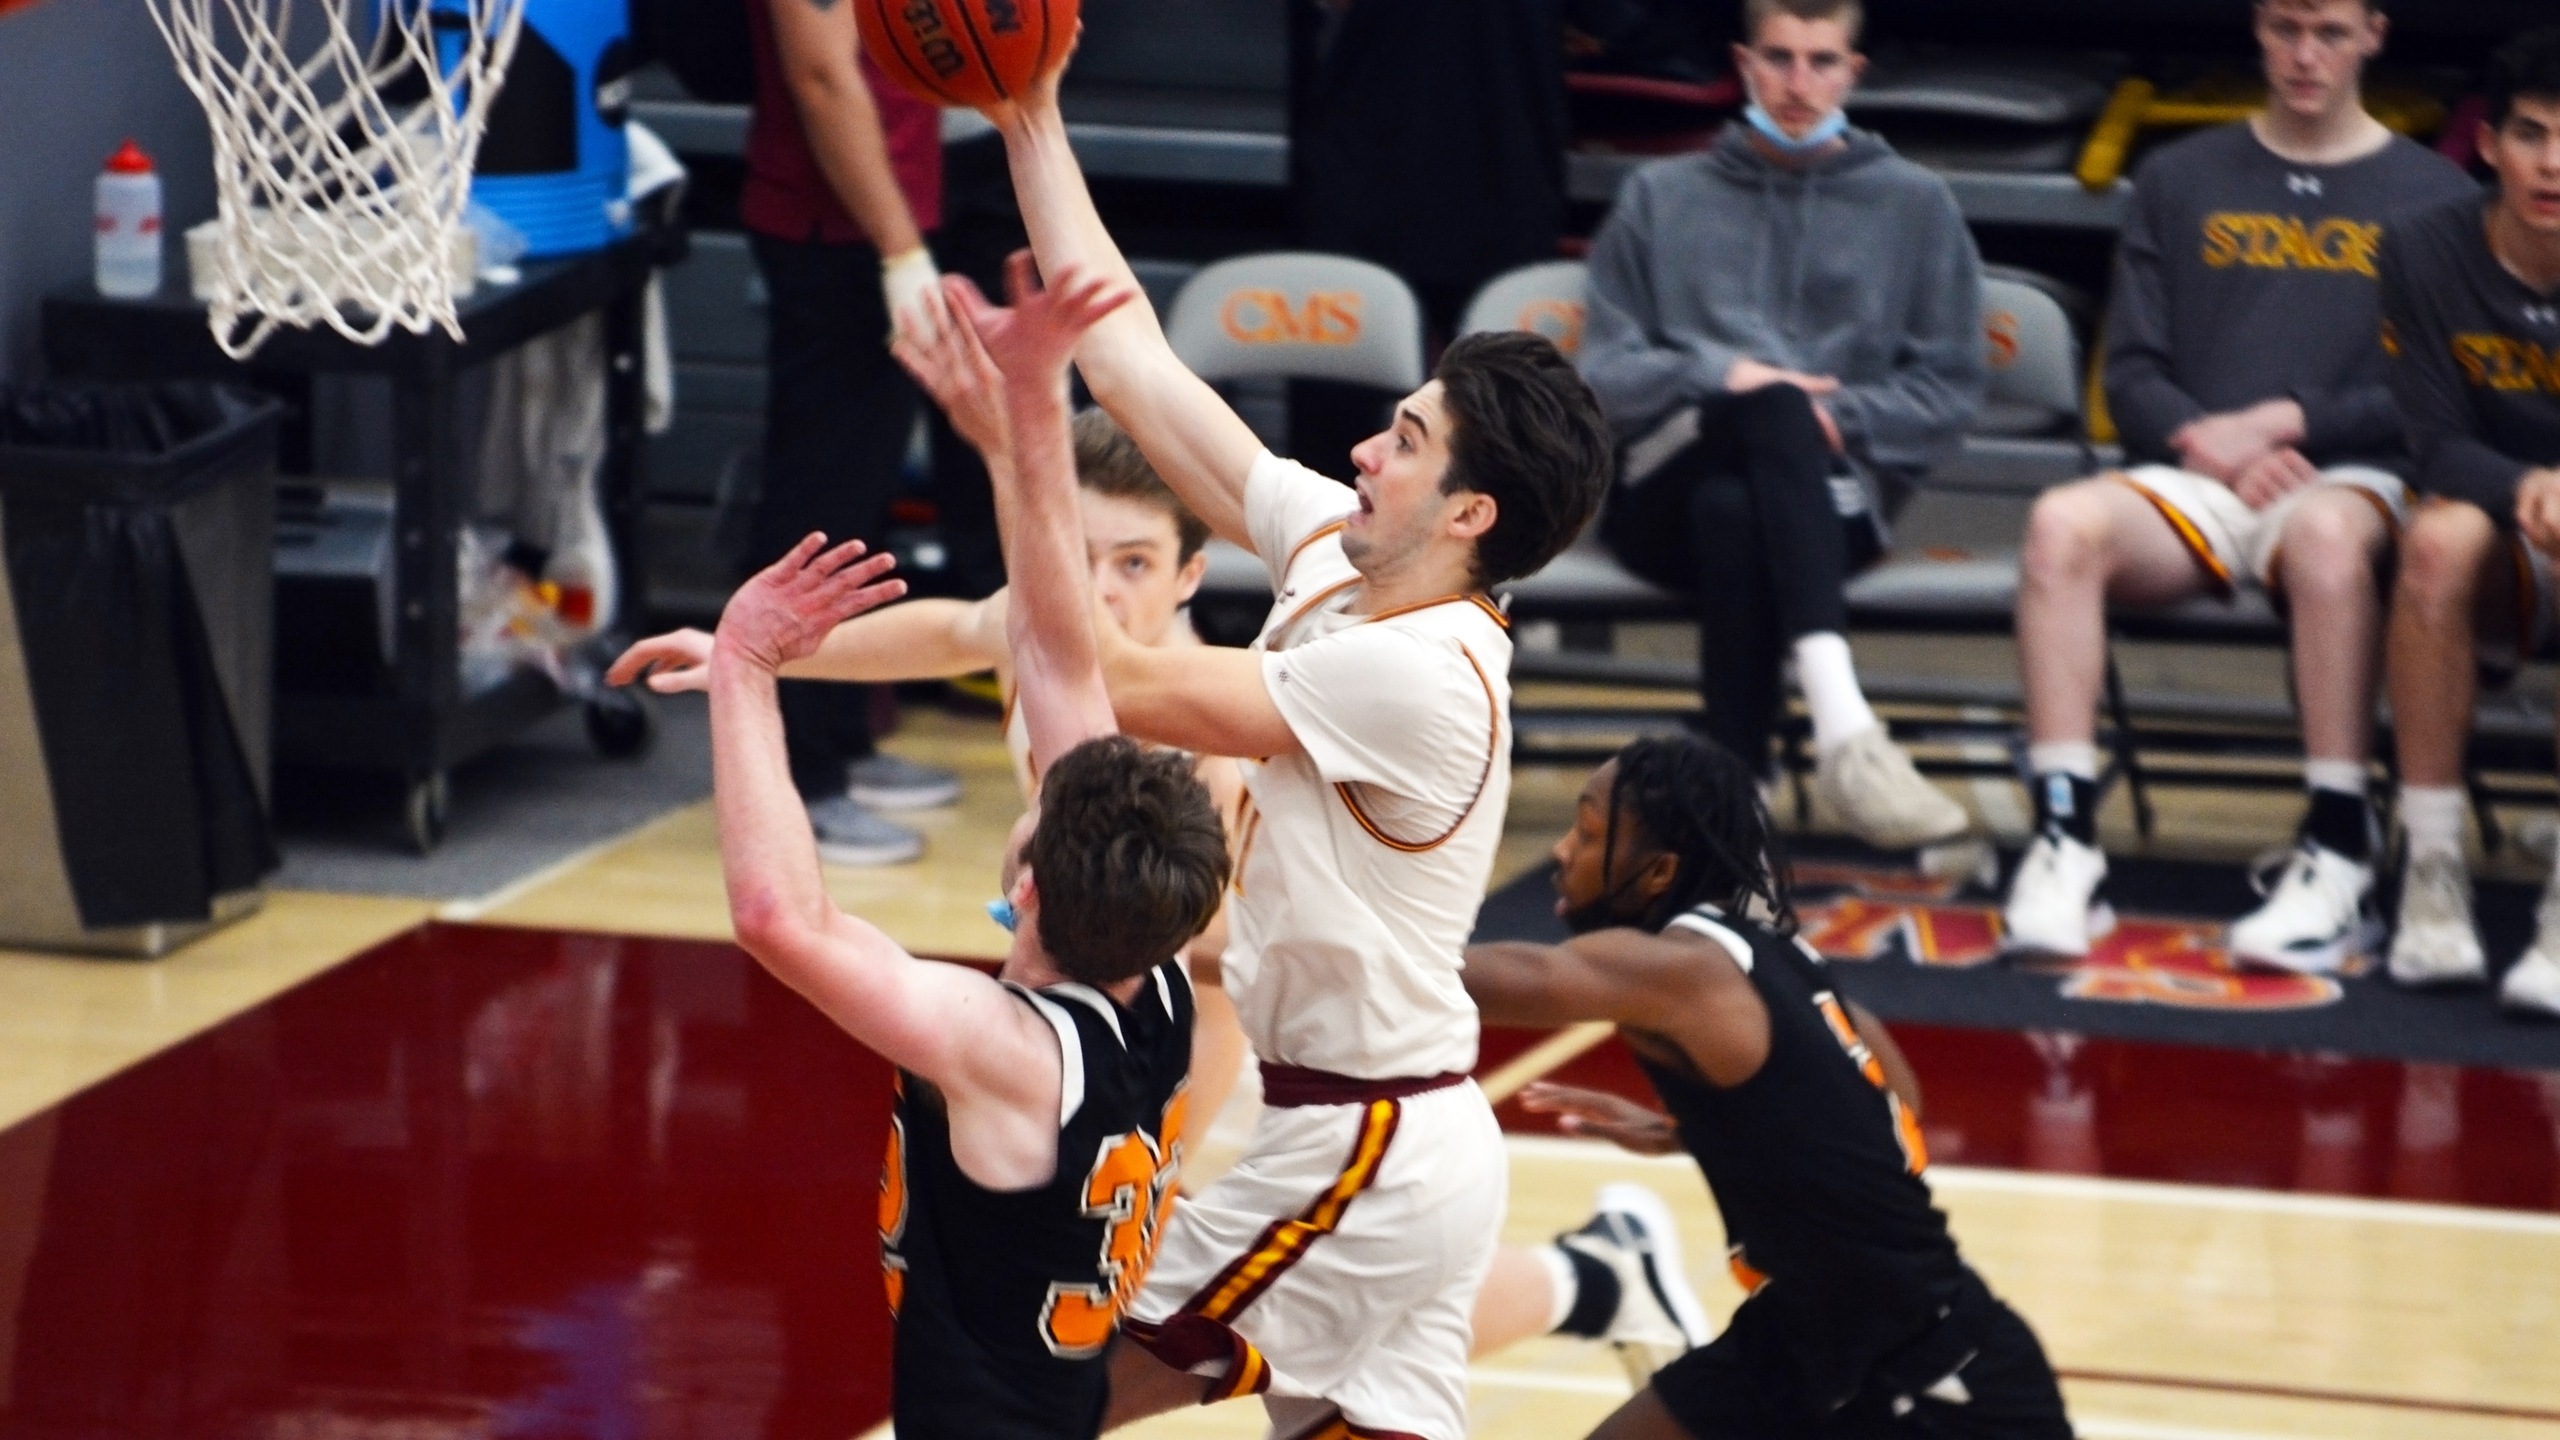 TJ Askew drives to the basket for a lay-up against Occidental.